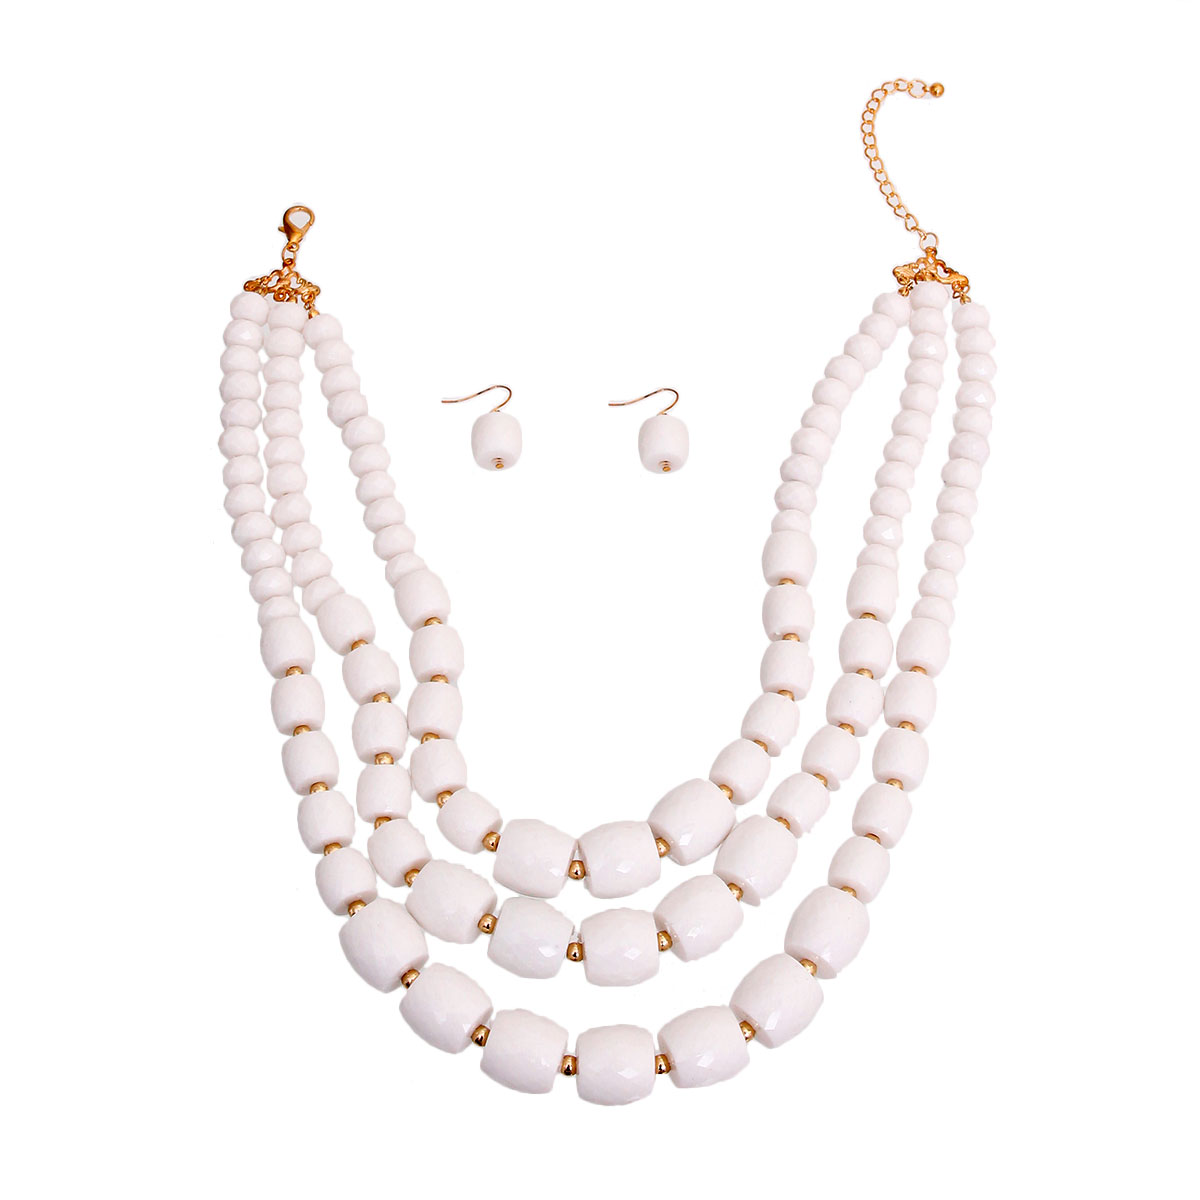 White Cylinder Bead Necklace